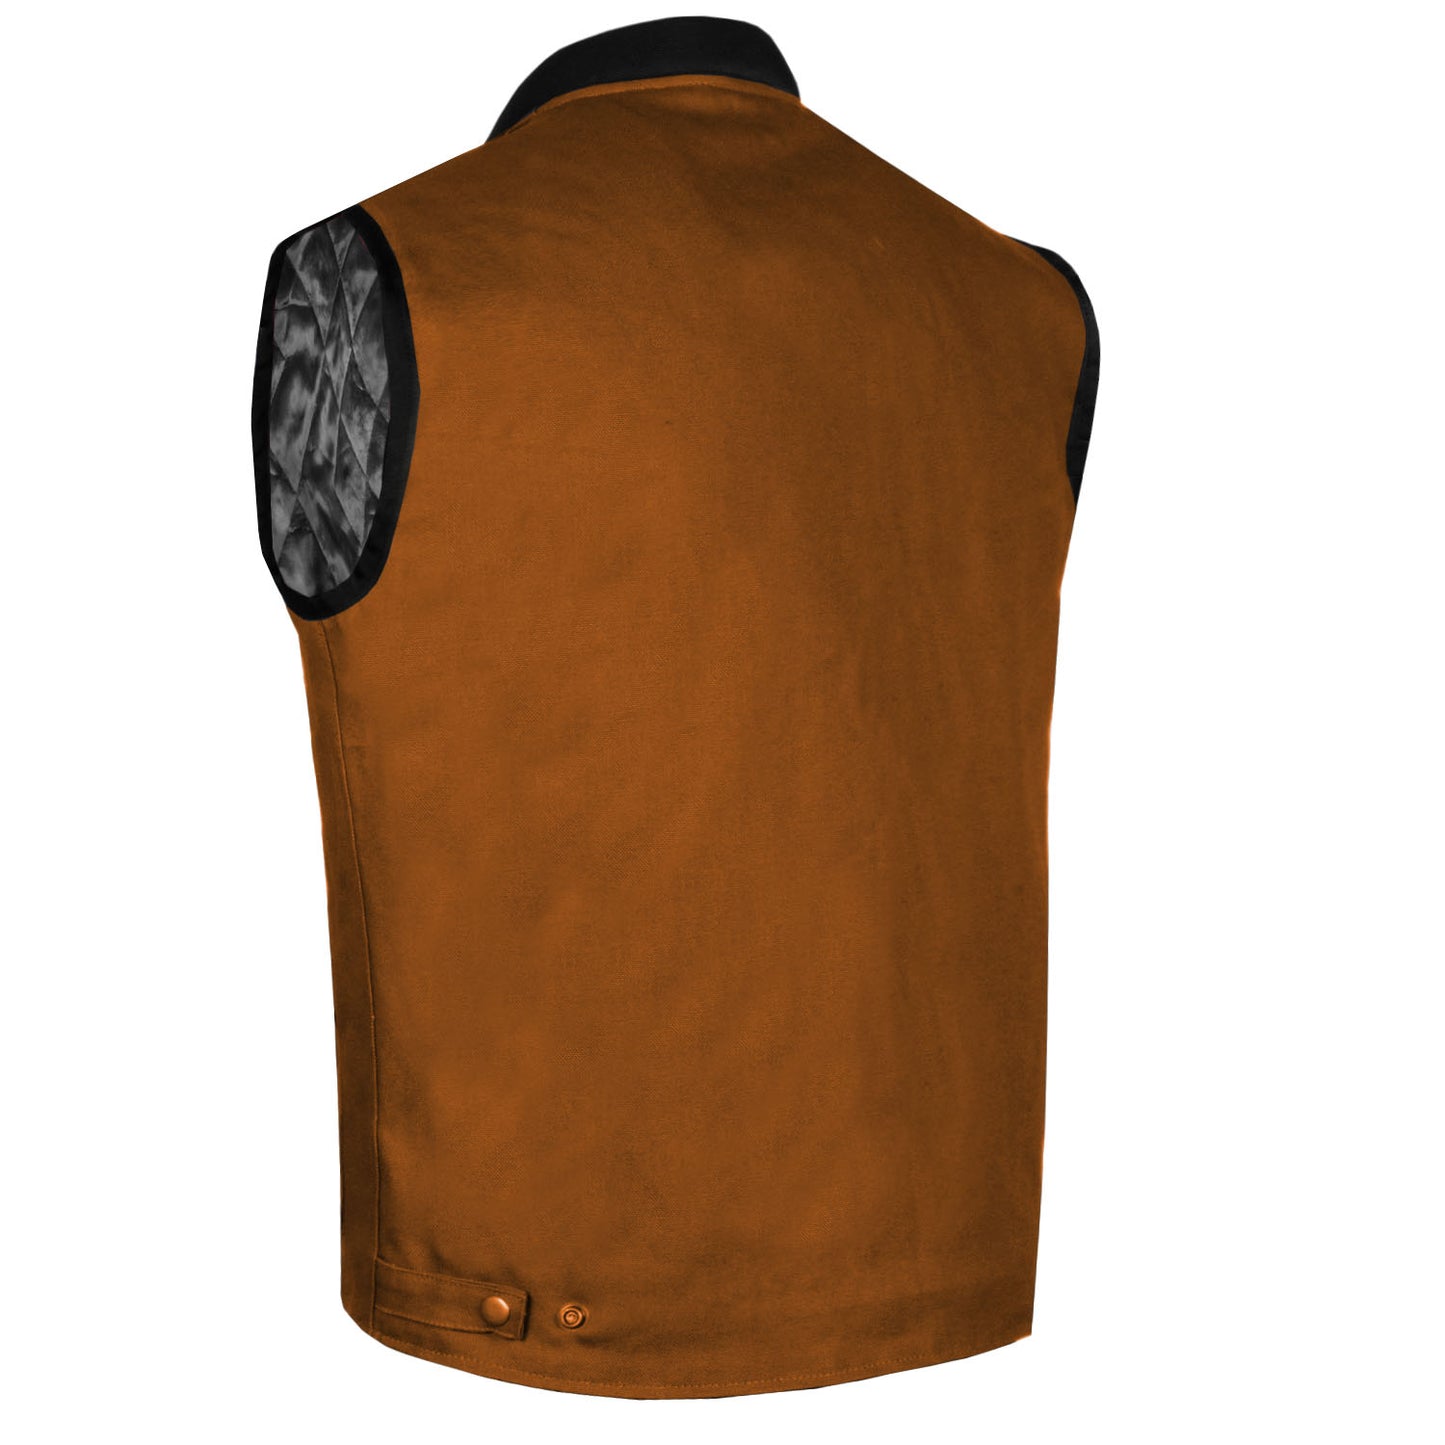 Jackets 4 Bikes Men's Dual Holsters Rugged Vest Concealed Carry Inside Pockets For Hunting Fishing Motorcycle and Outdoors Brown